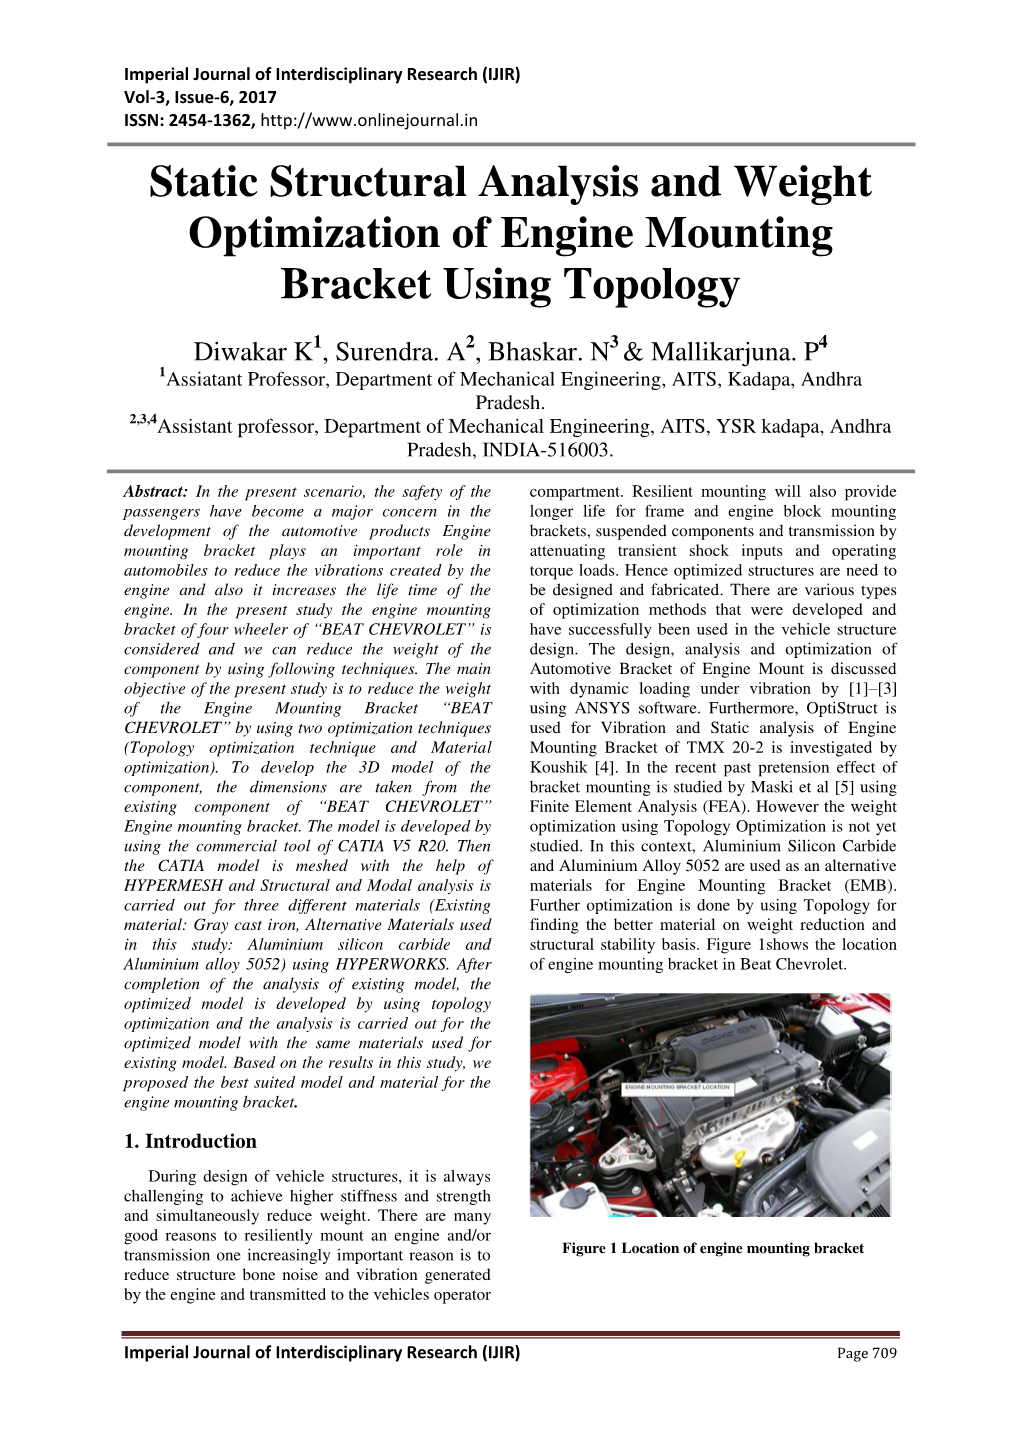 Static Structural Analysis and Weight Optimization of Engine Mounting Bracket Using Topology